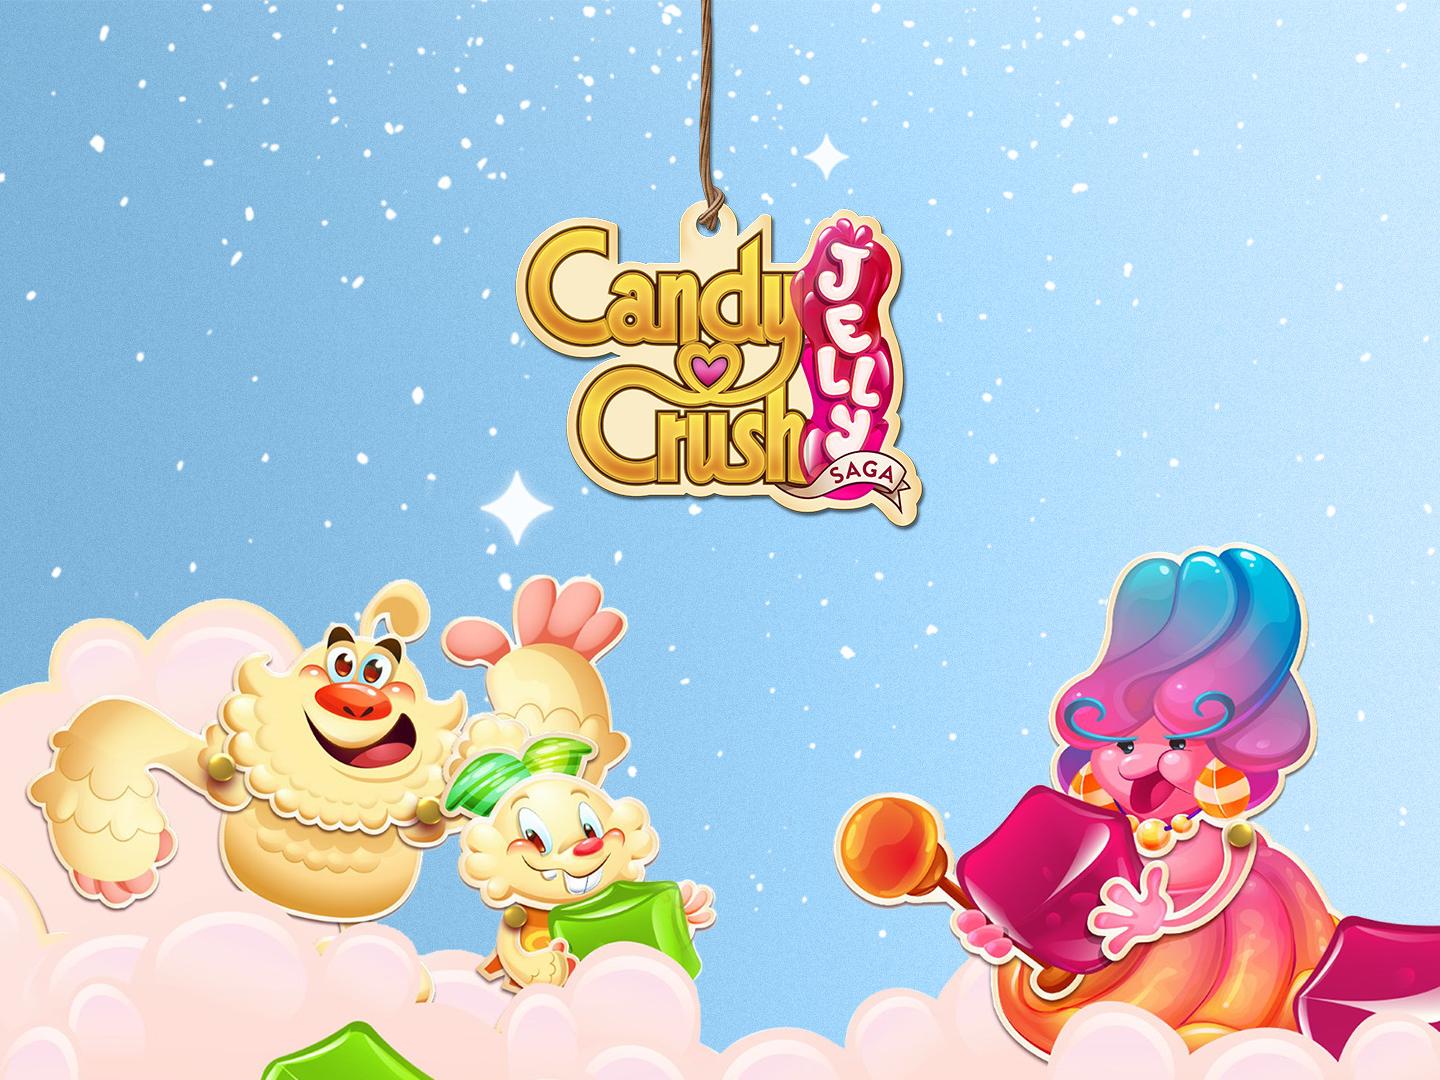 UI for King's mobile game: Candy Crush Jelly Saga